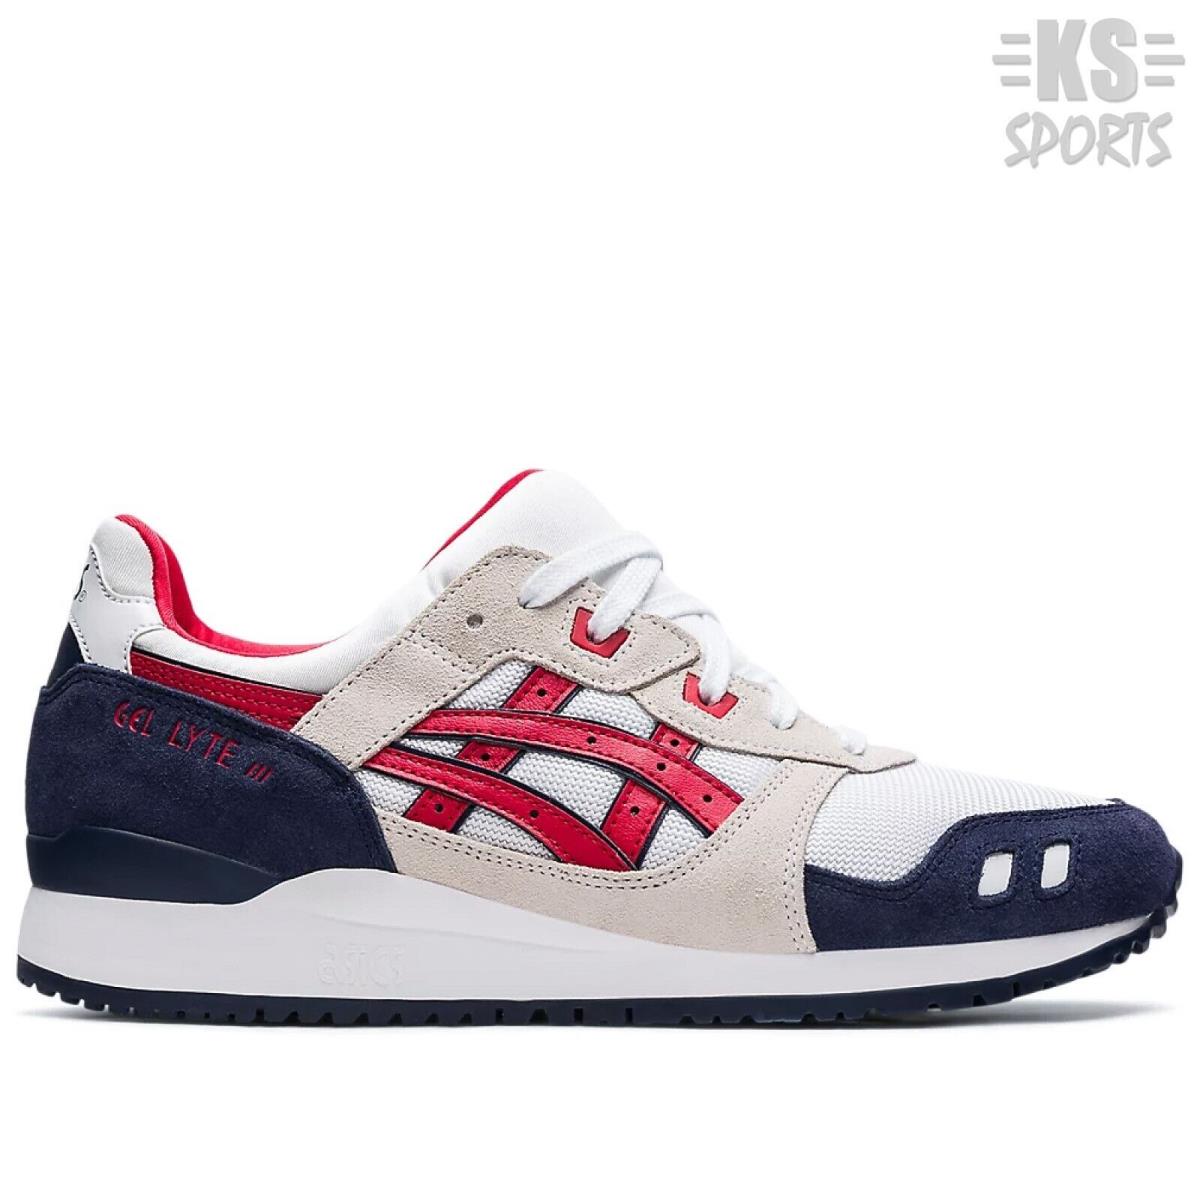 Asics Gel-lyte Iii OG `white Classic Red` Men`s Athletic Shoes 1203A114-101